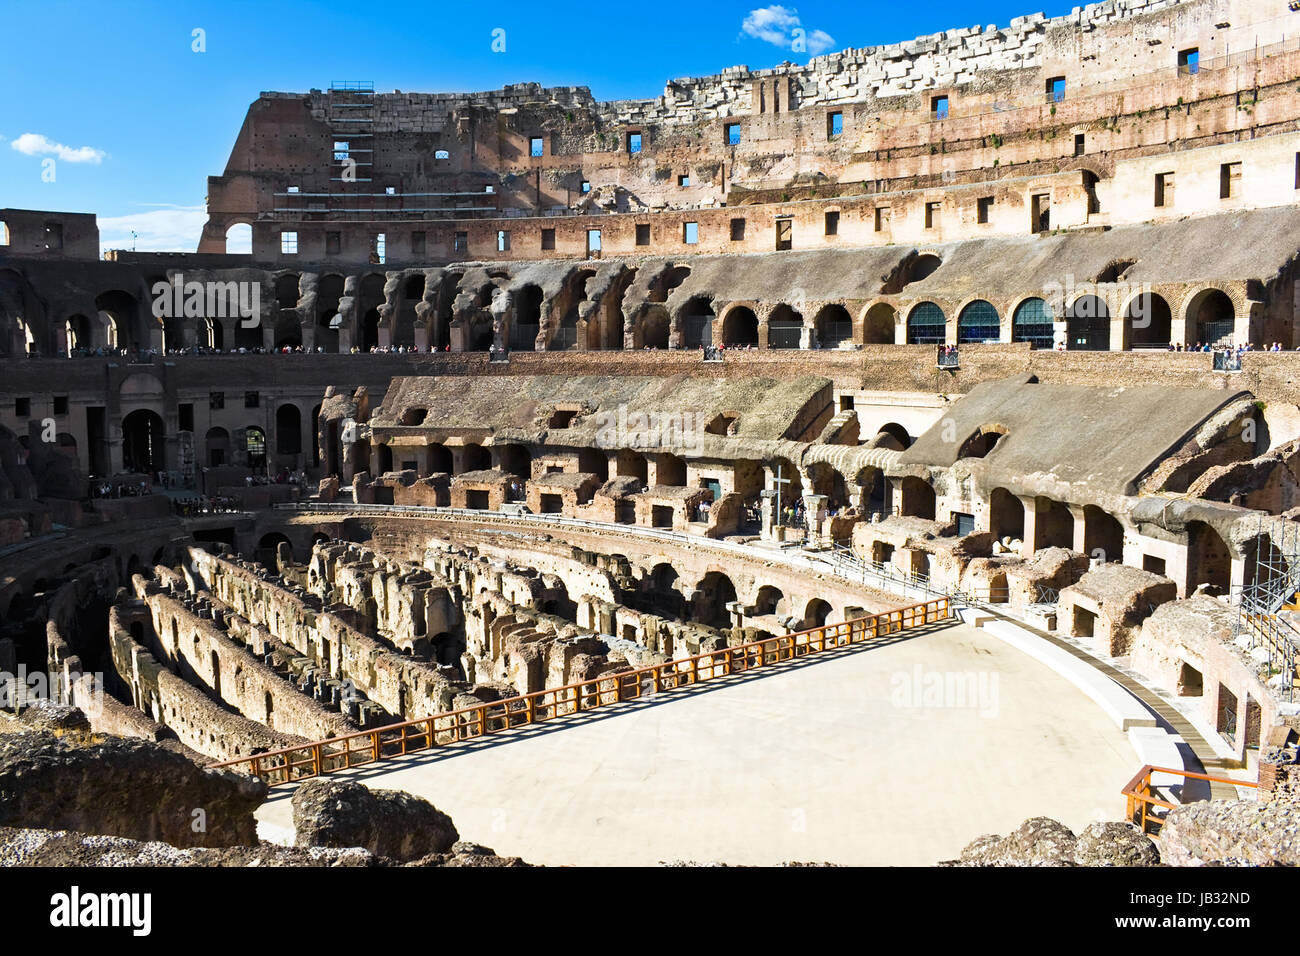 Ancient ruins of great roman amphitheater Colosseum, Rome, Italy Stock Photo